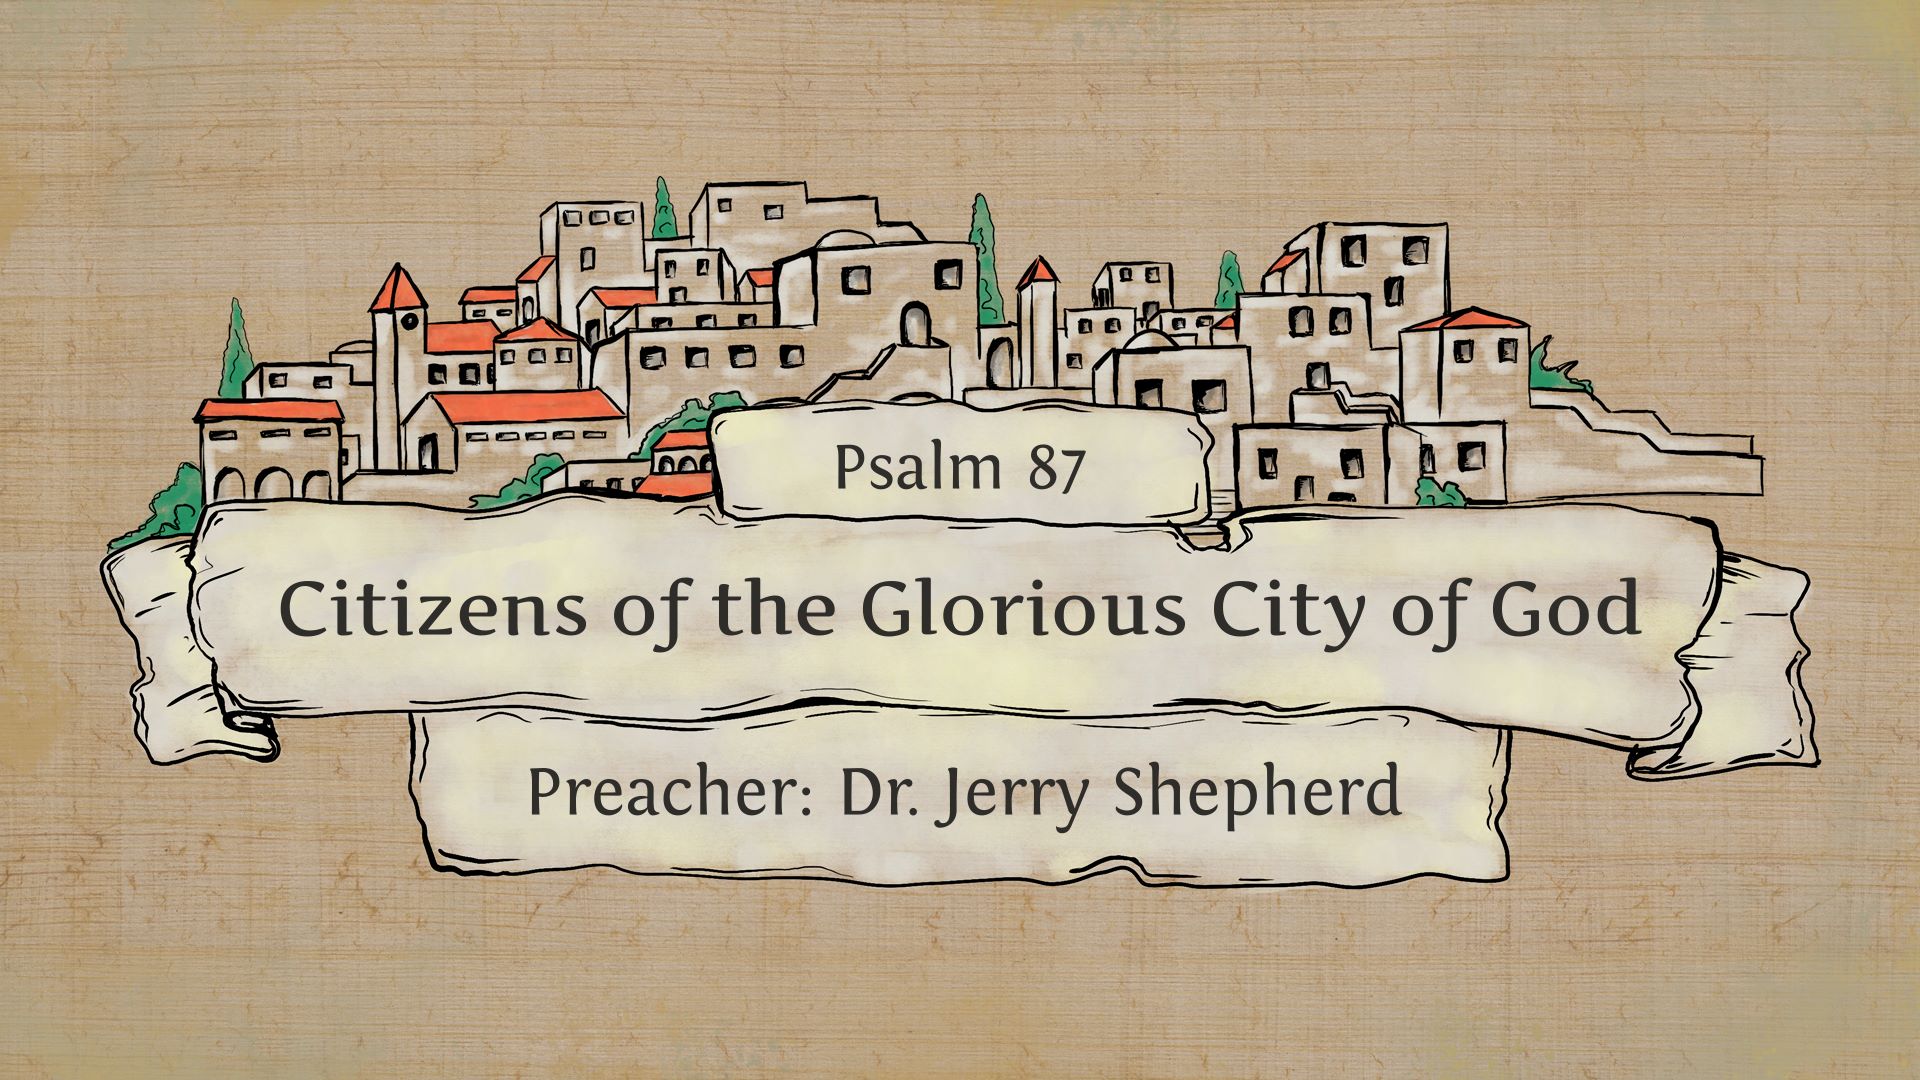 Citizens of the Glorious City of God